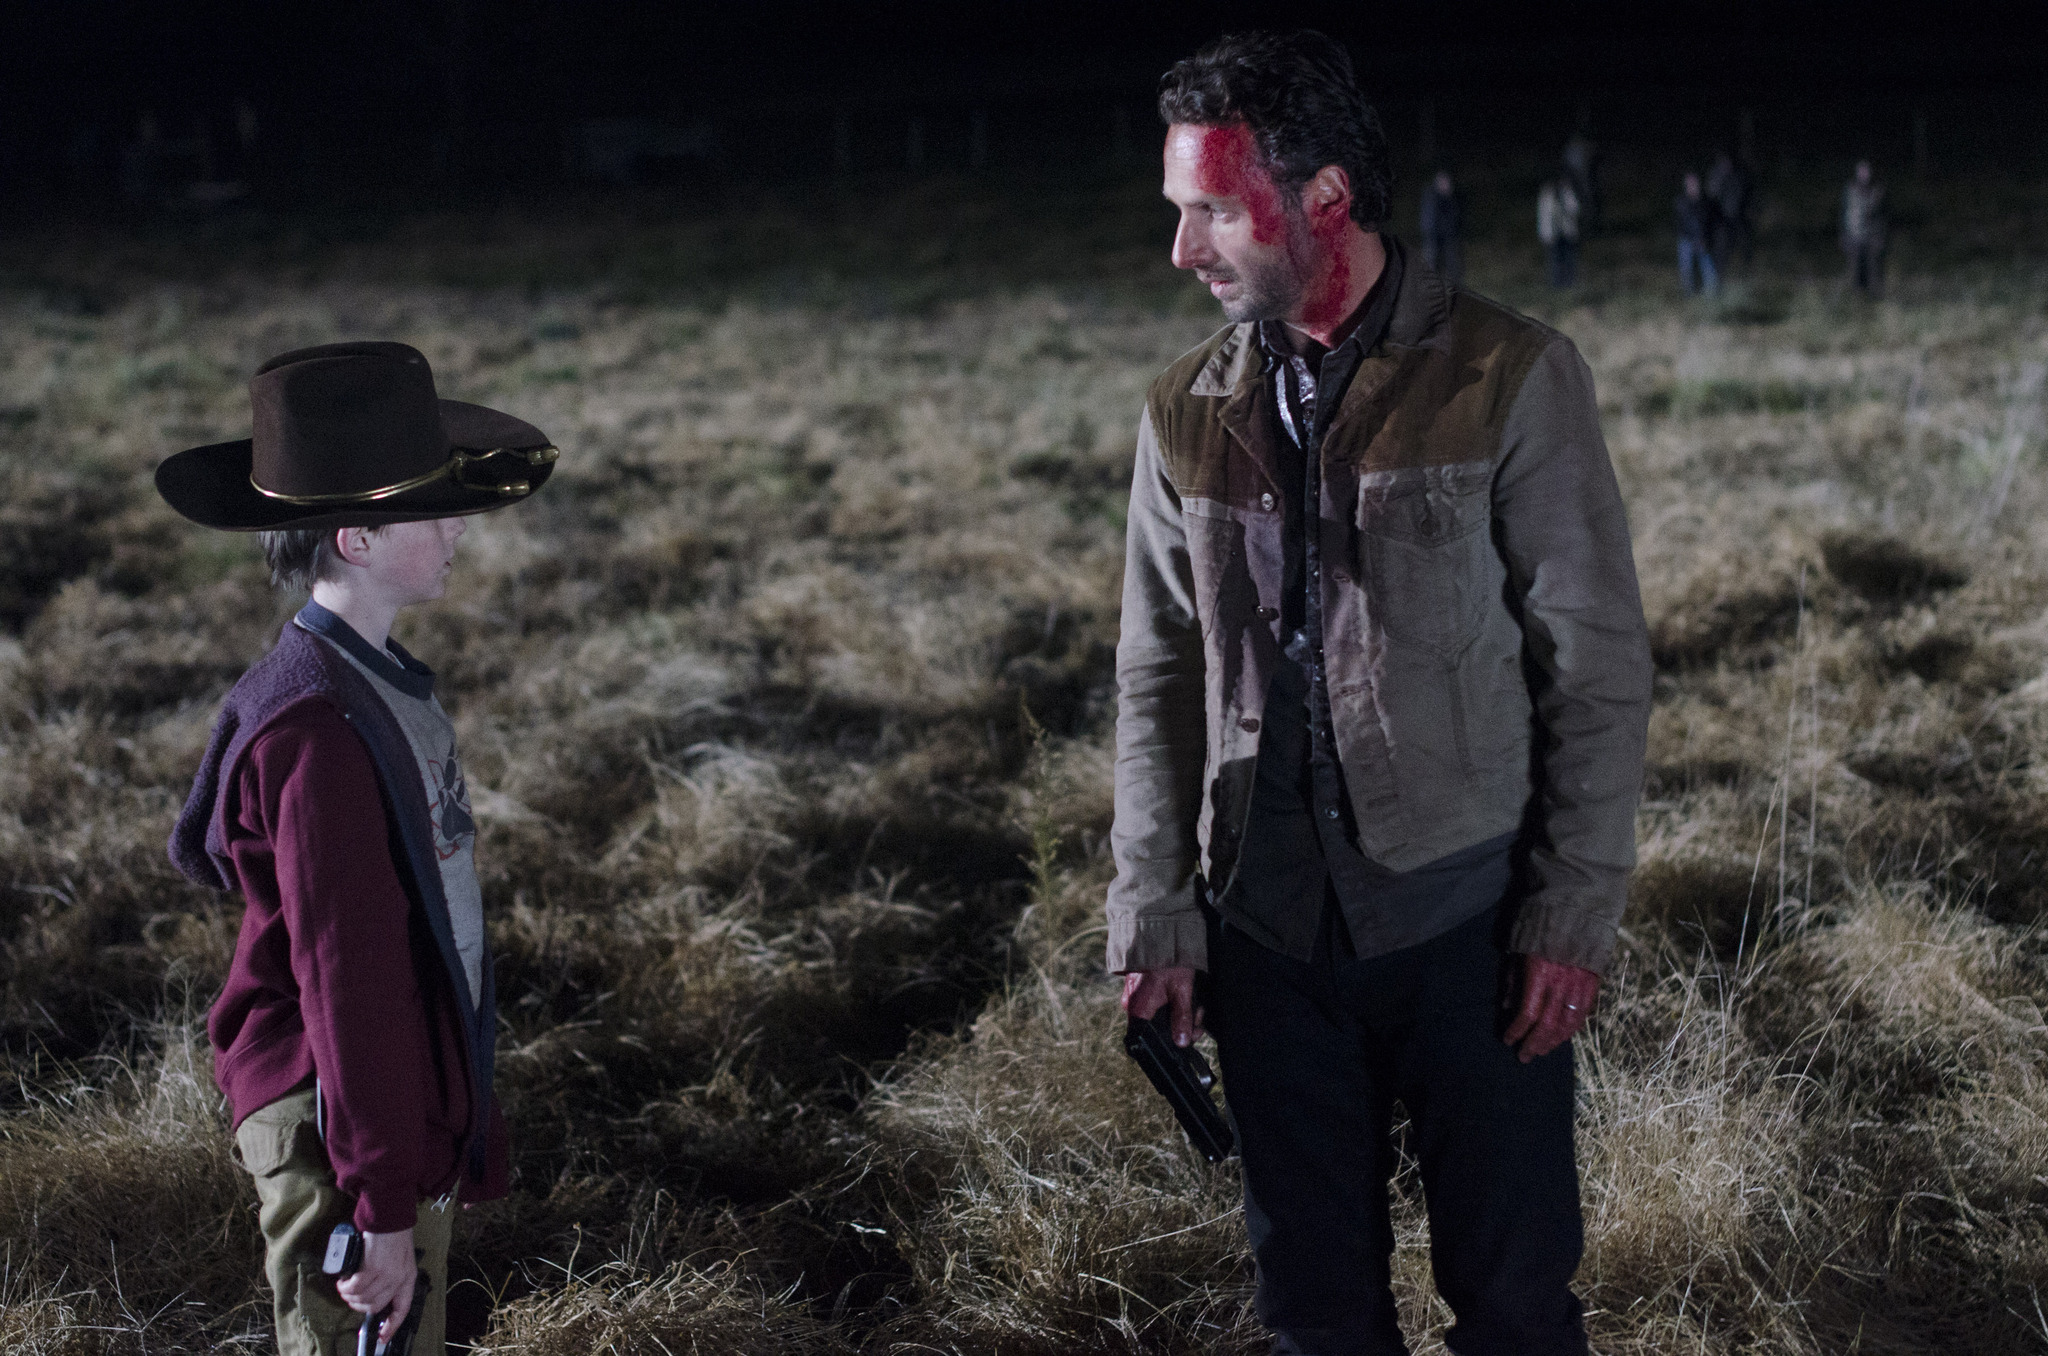 Still of Andrew Lincoln and Chandler Riggs in Vaiksciojantys negyveliai (2010)